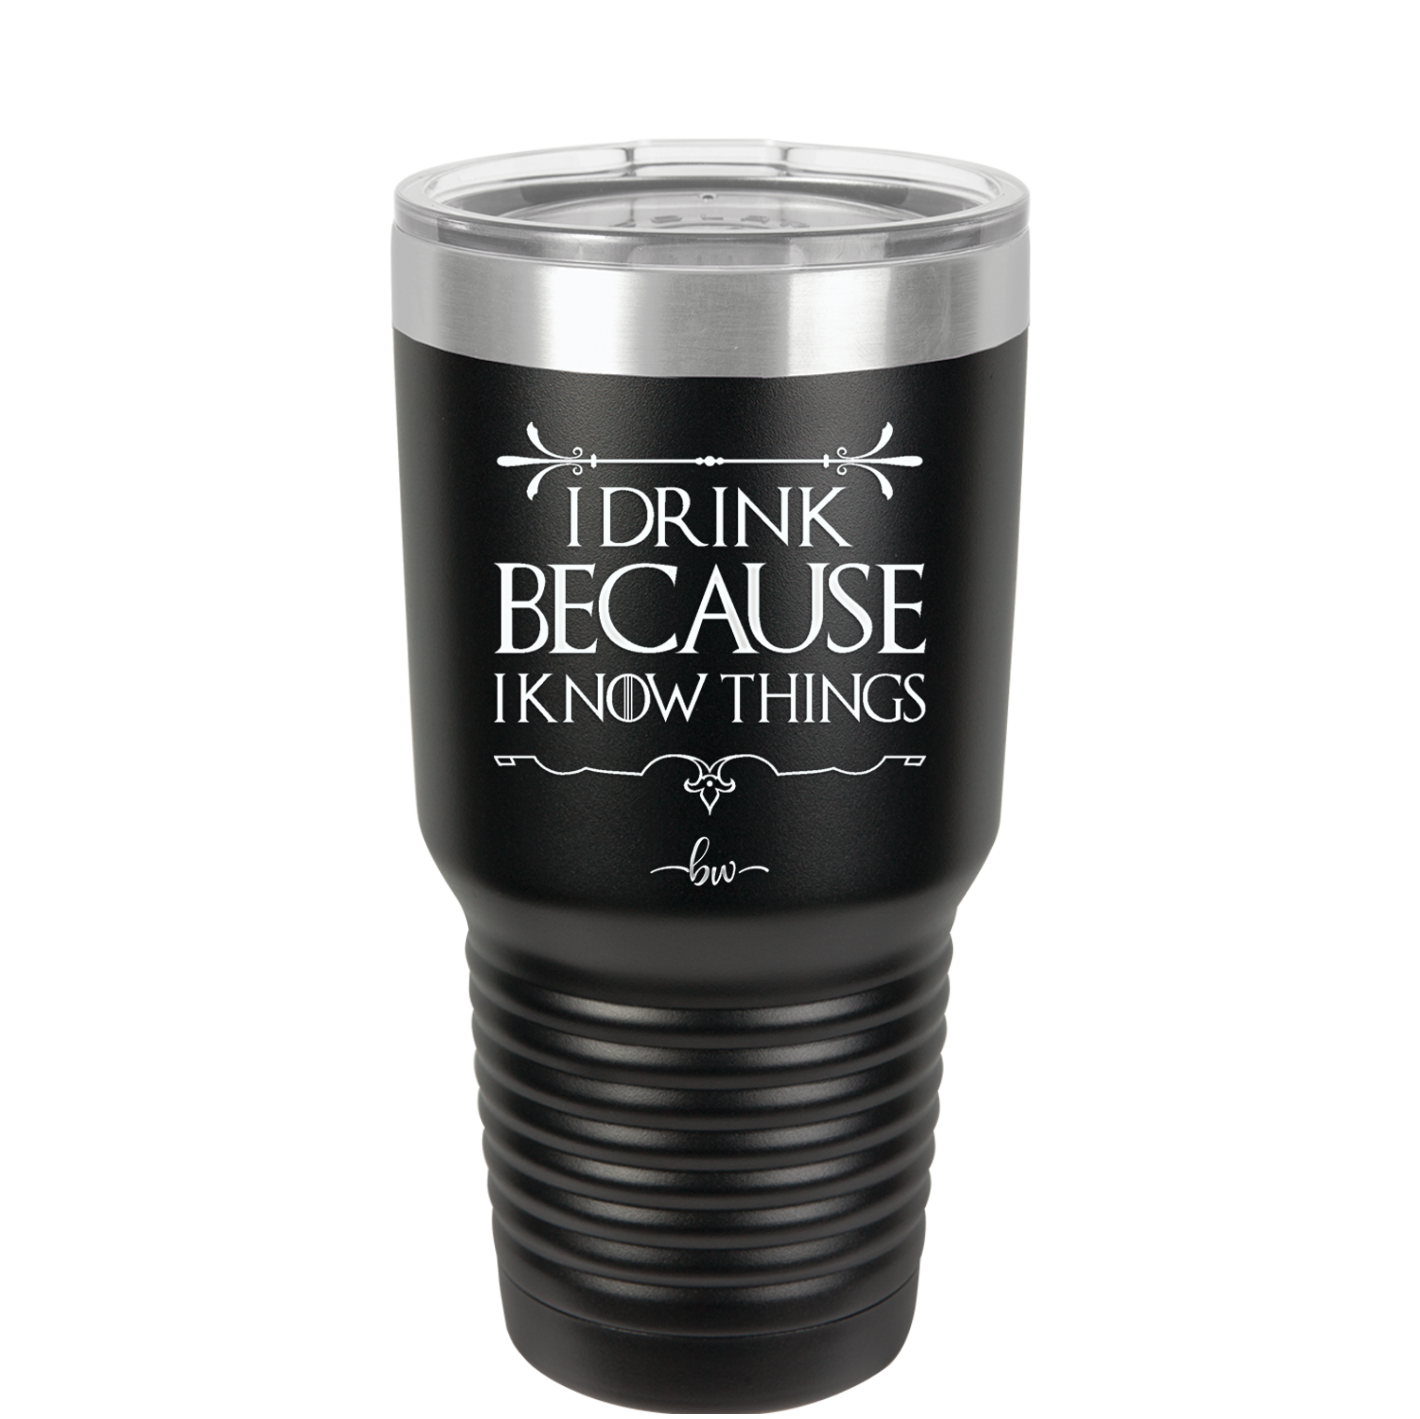 I Drink Because I Know Things - Laser Engraved Stainless Steel Drinkware - 1319 -